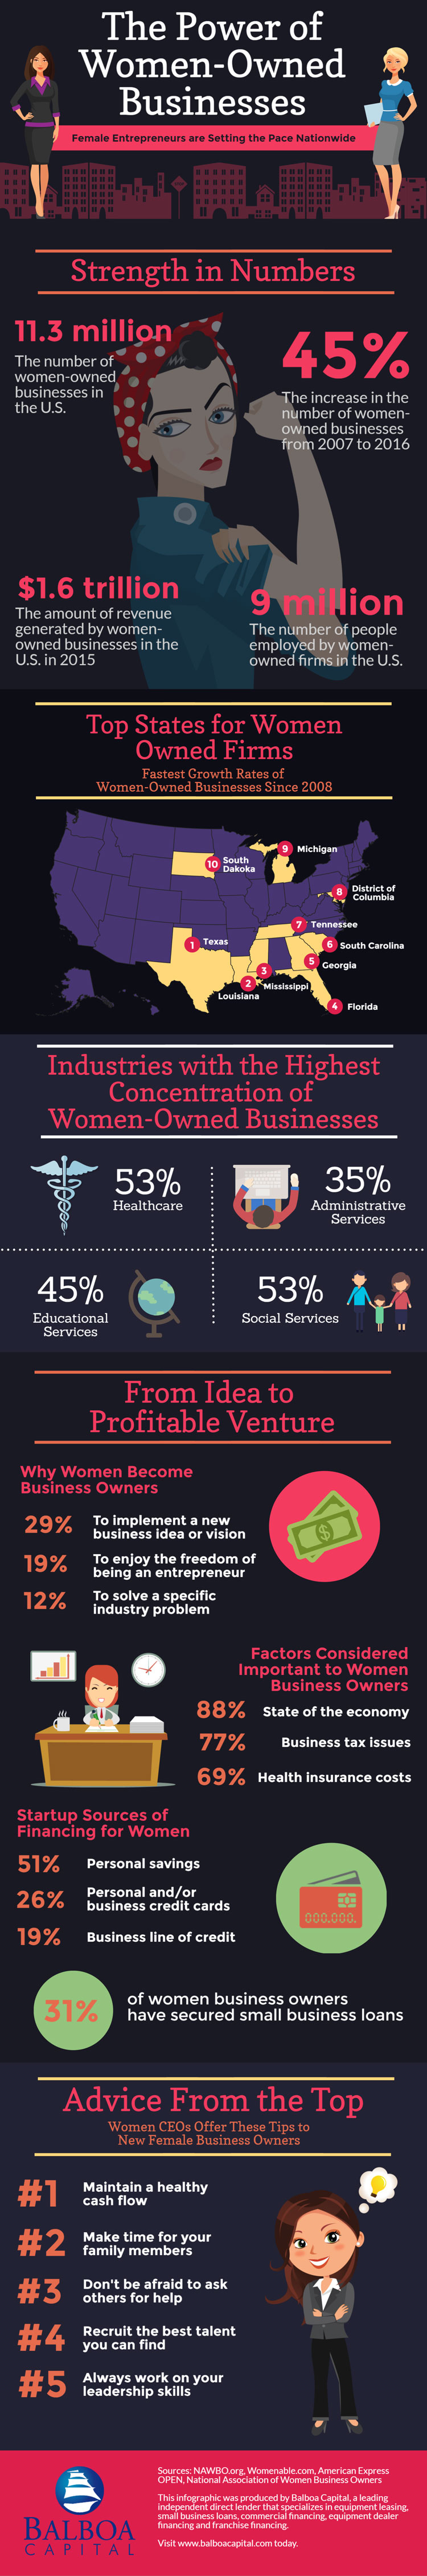 Women in Business Infographic